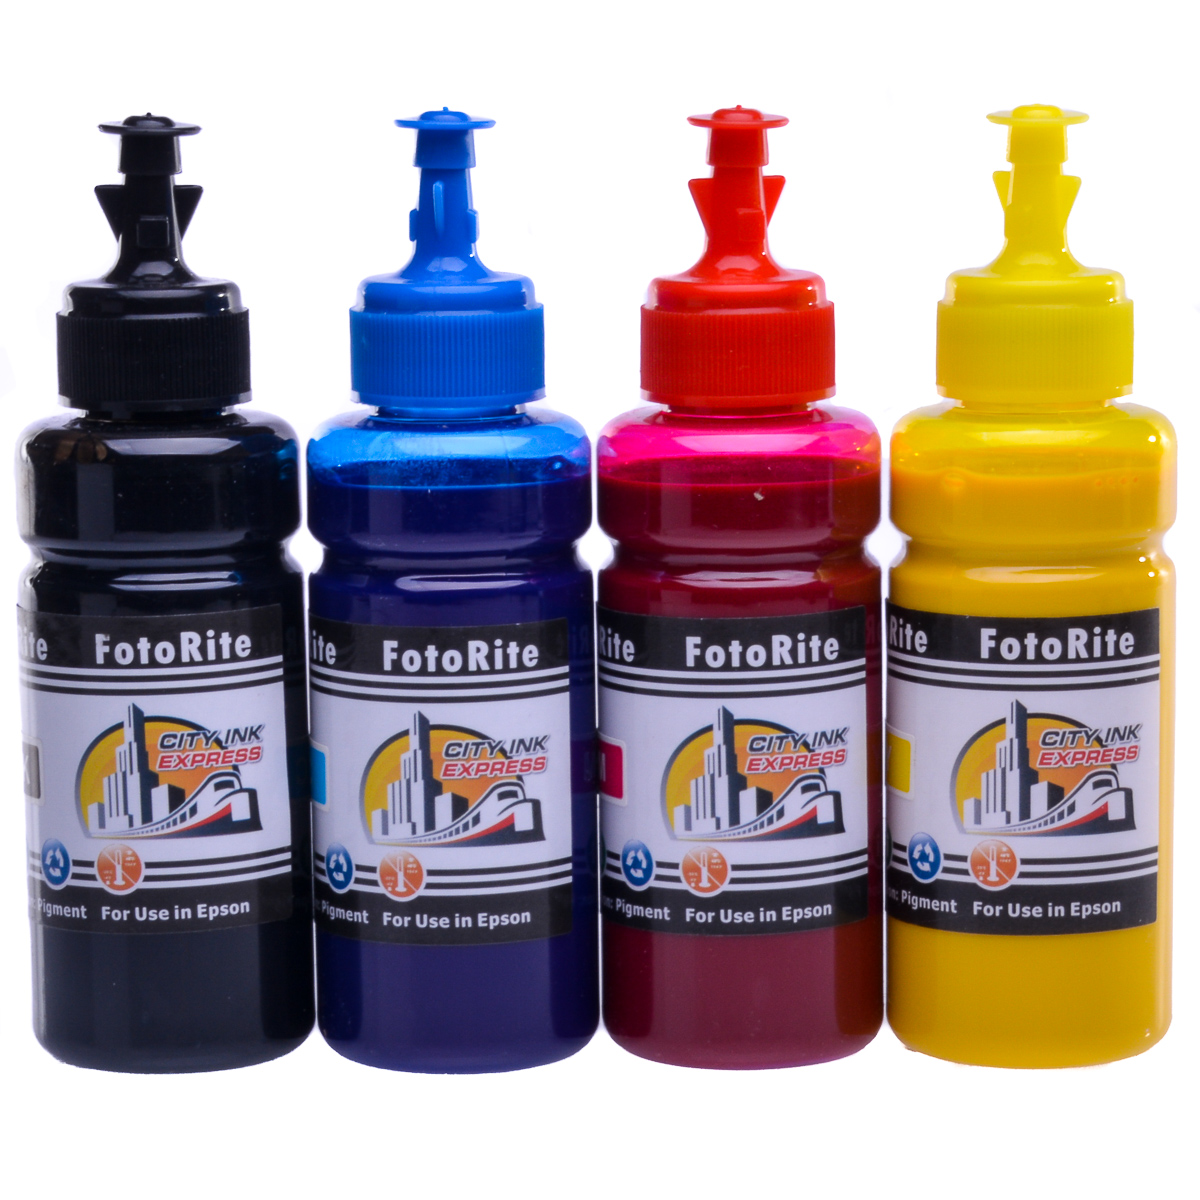 Cheap Multipack pigment ink refill replaces Epson XP-2100